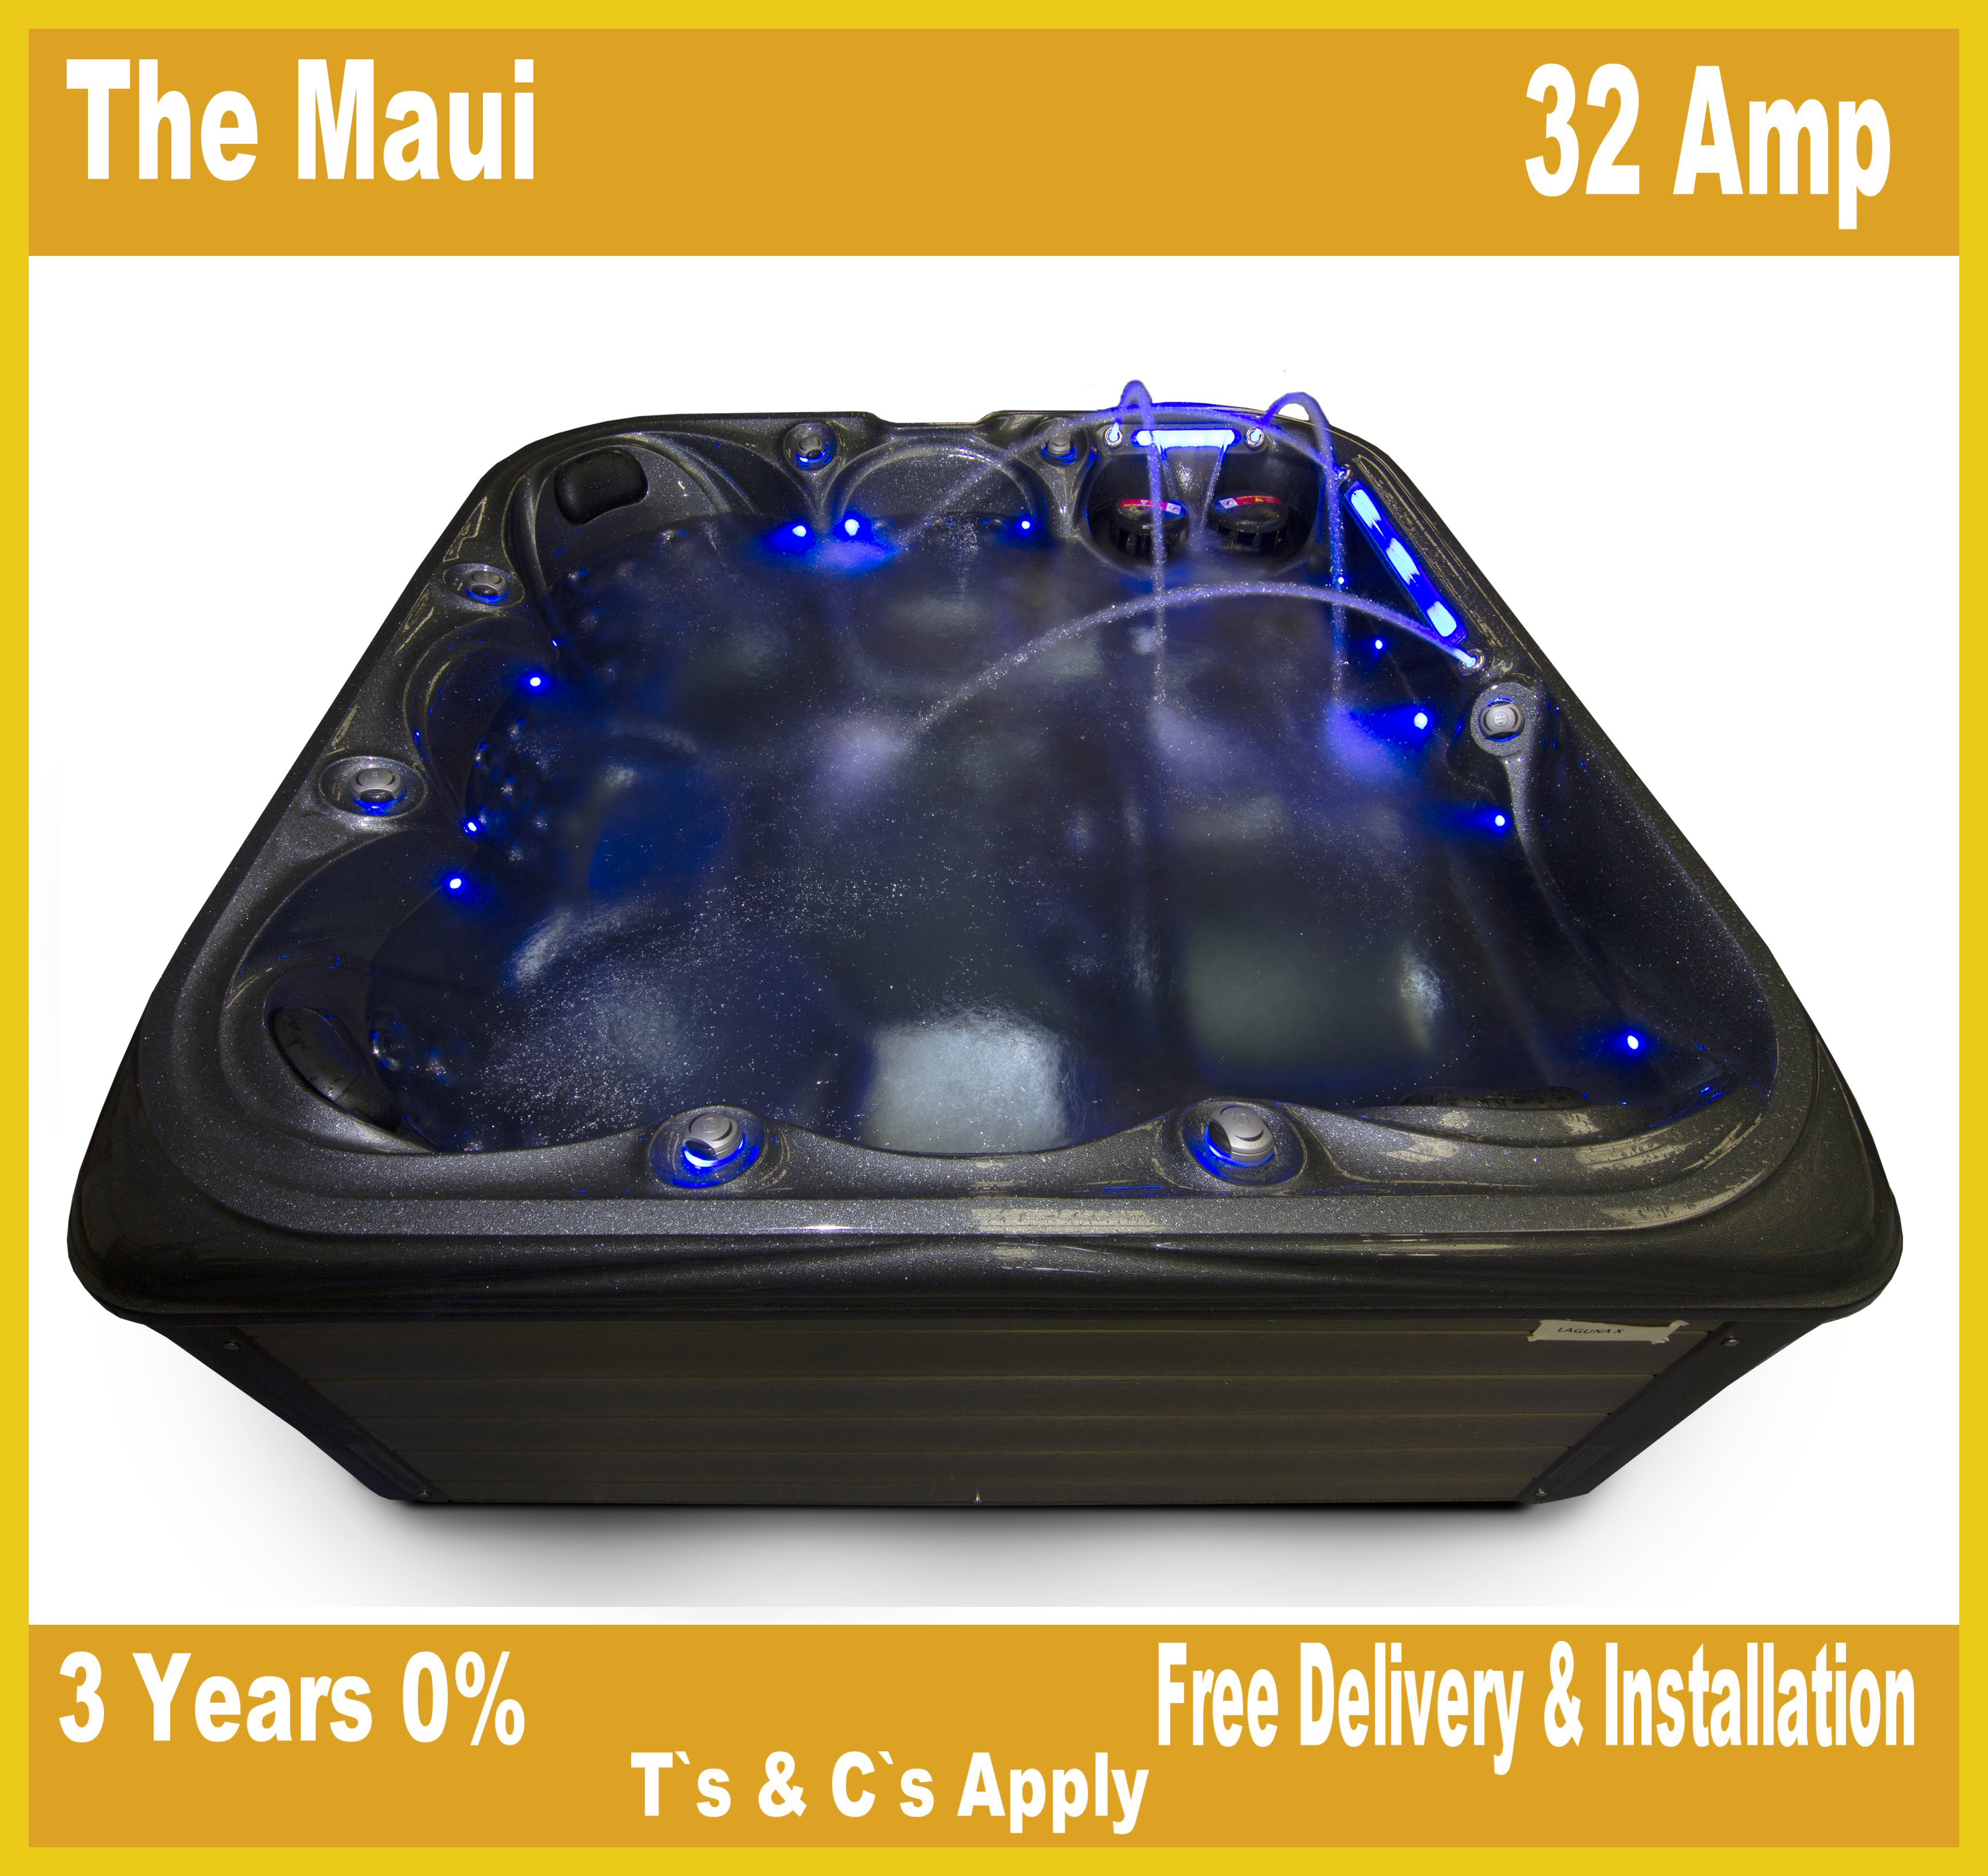 The Maui-6 Adults-1 Lounger